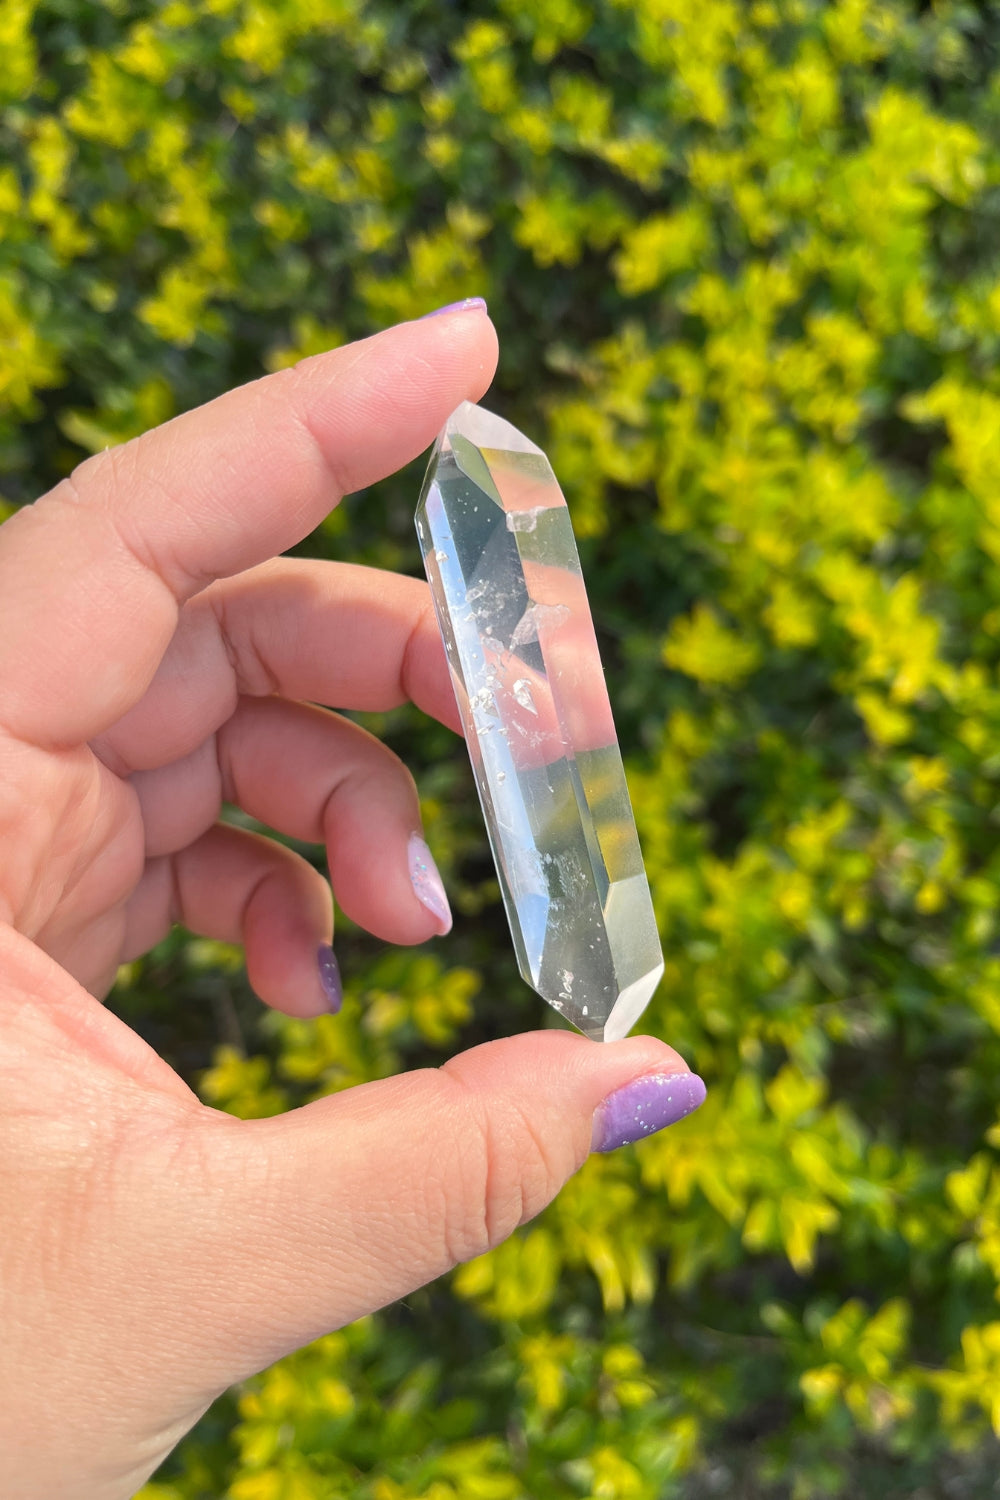 Clear Quartz Double Terminated Crystal Point